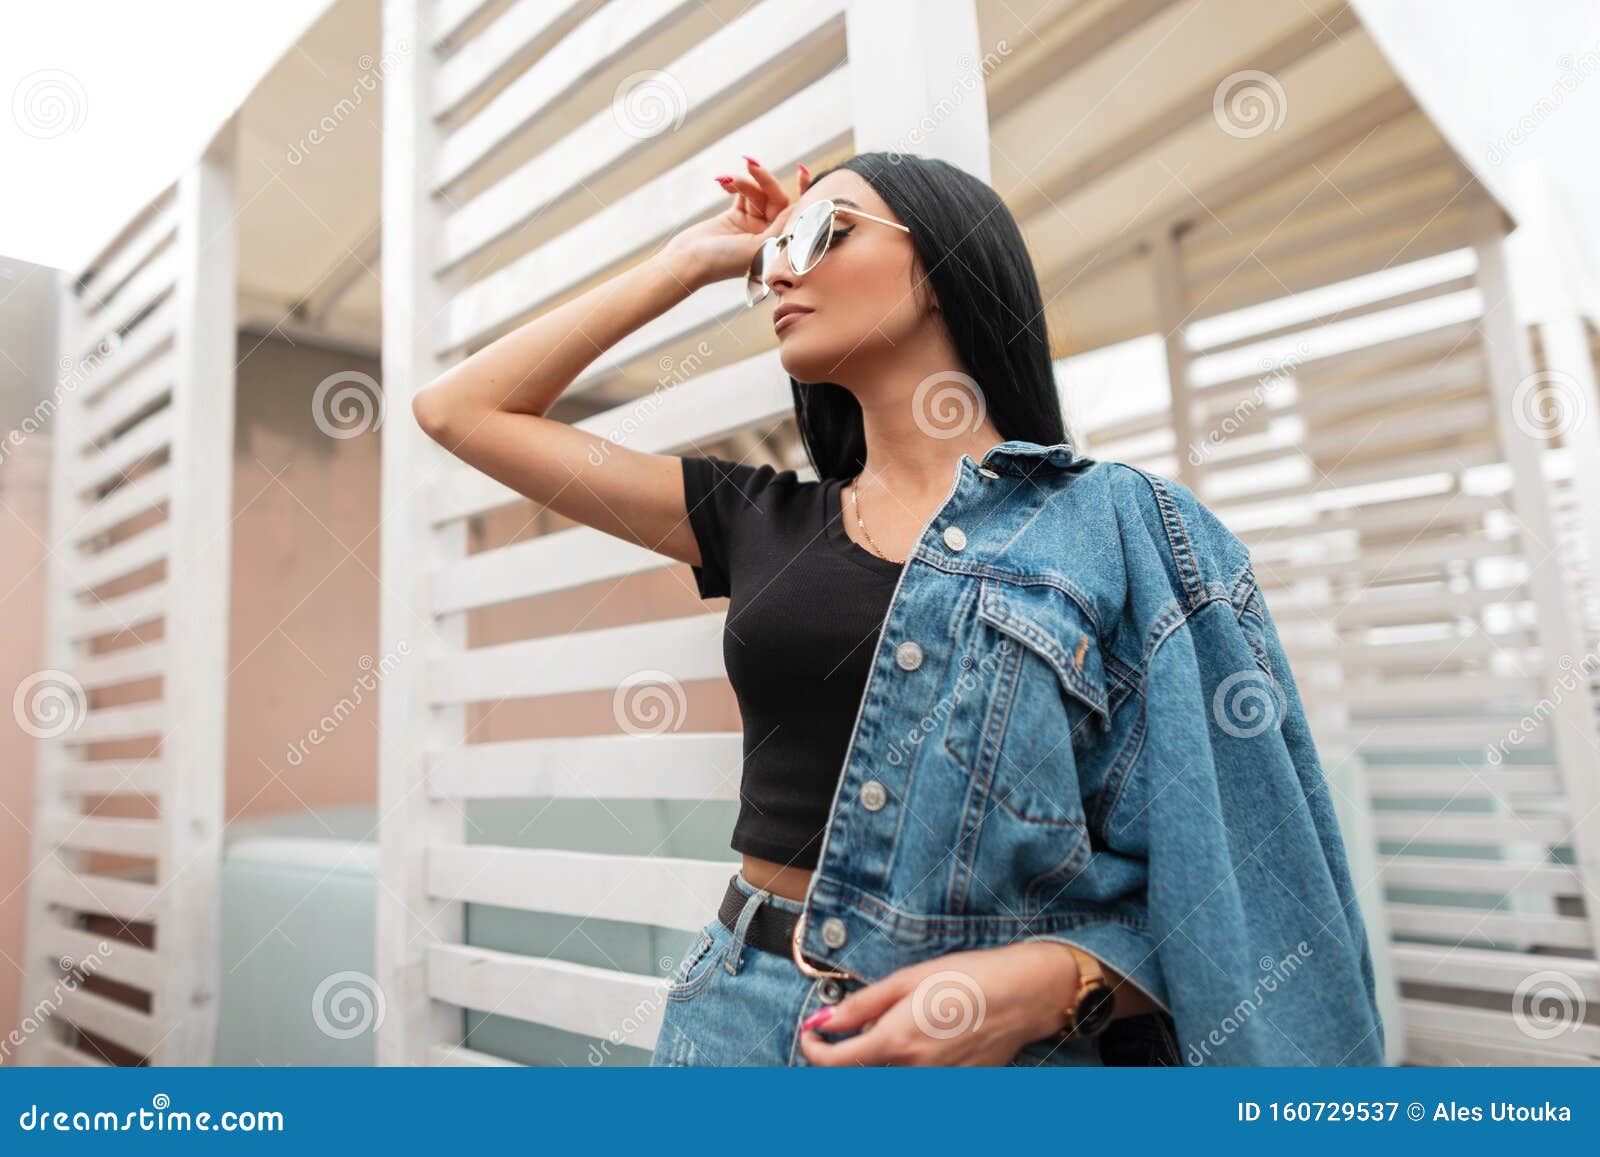 Trendy Young Woman Model with Black Long Hair in a Black T-shirt in  Fashionable Jeans Clothes in a Stylish Sunglasses. Stock Image - Image of  autumn, caucasian: 160729537